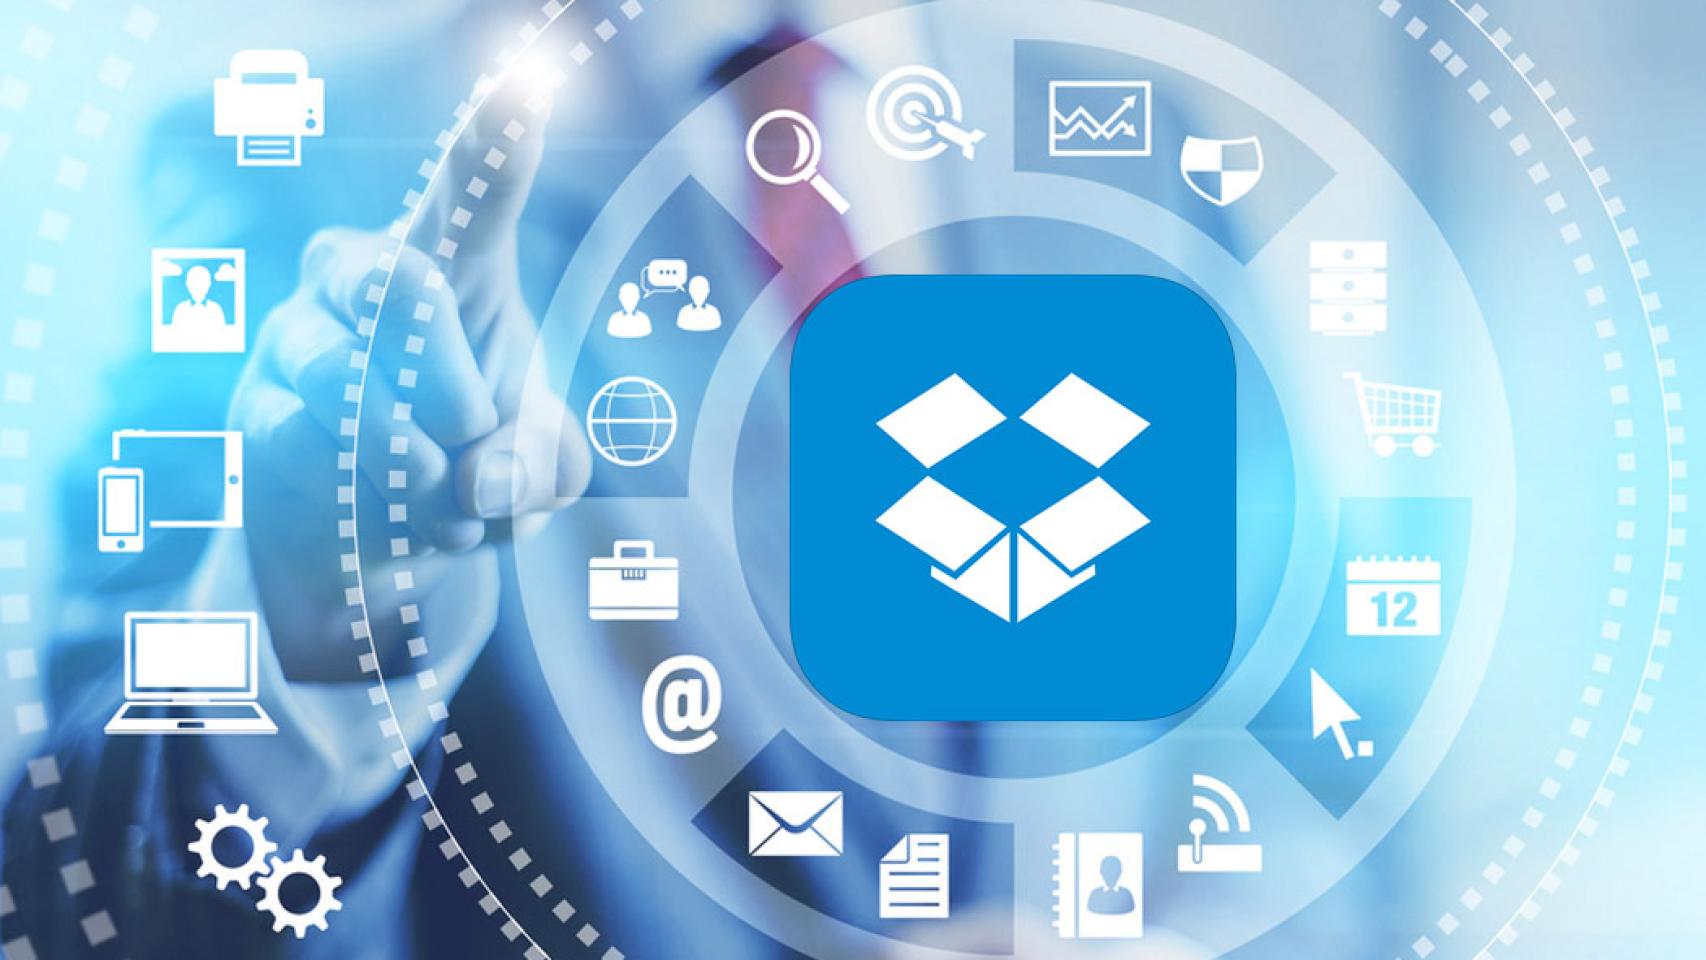 dropbox and photo privacy